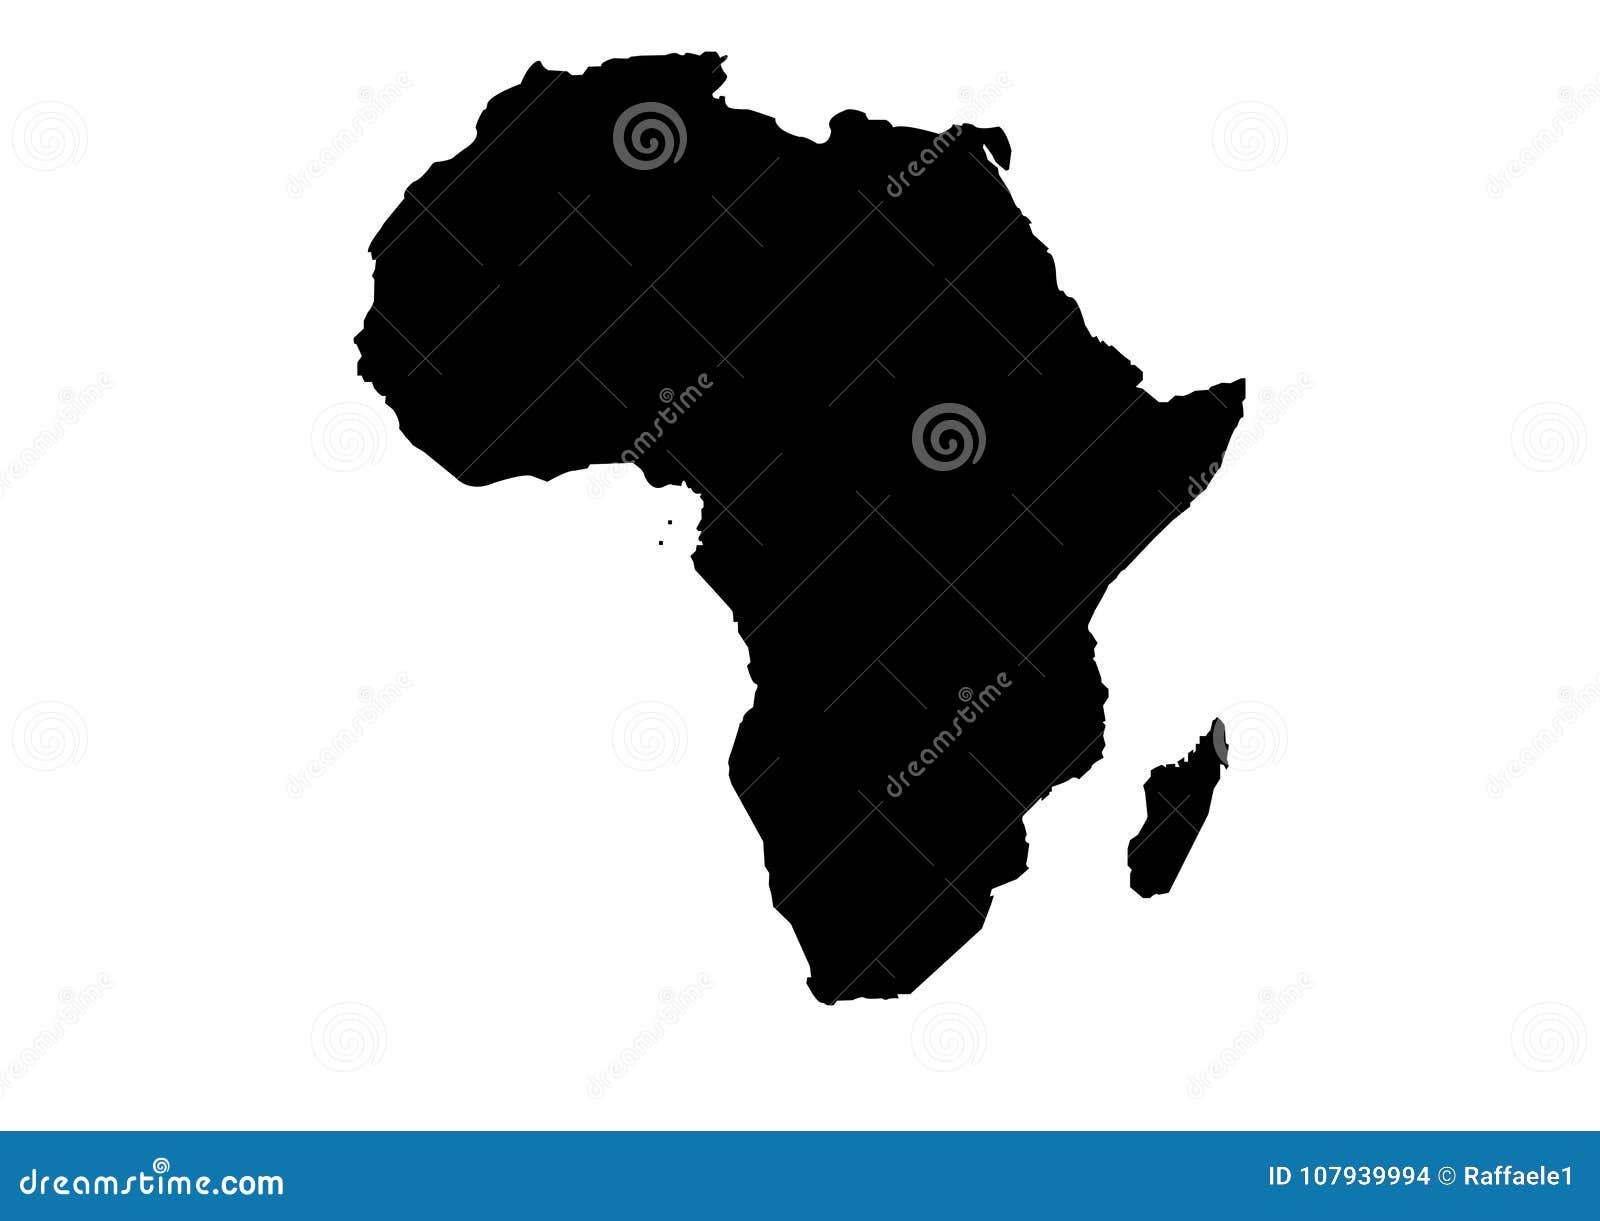 Africa Map Vector Silhouette Stock Vector - Illustration of madagascar, vector: 107939994